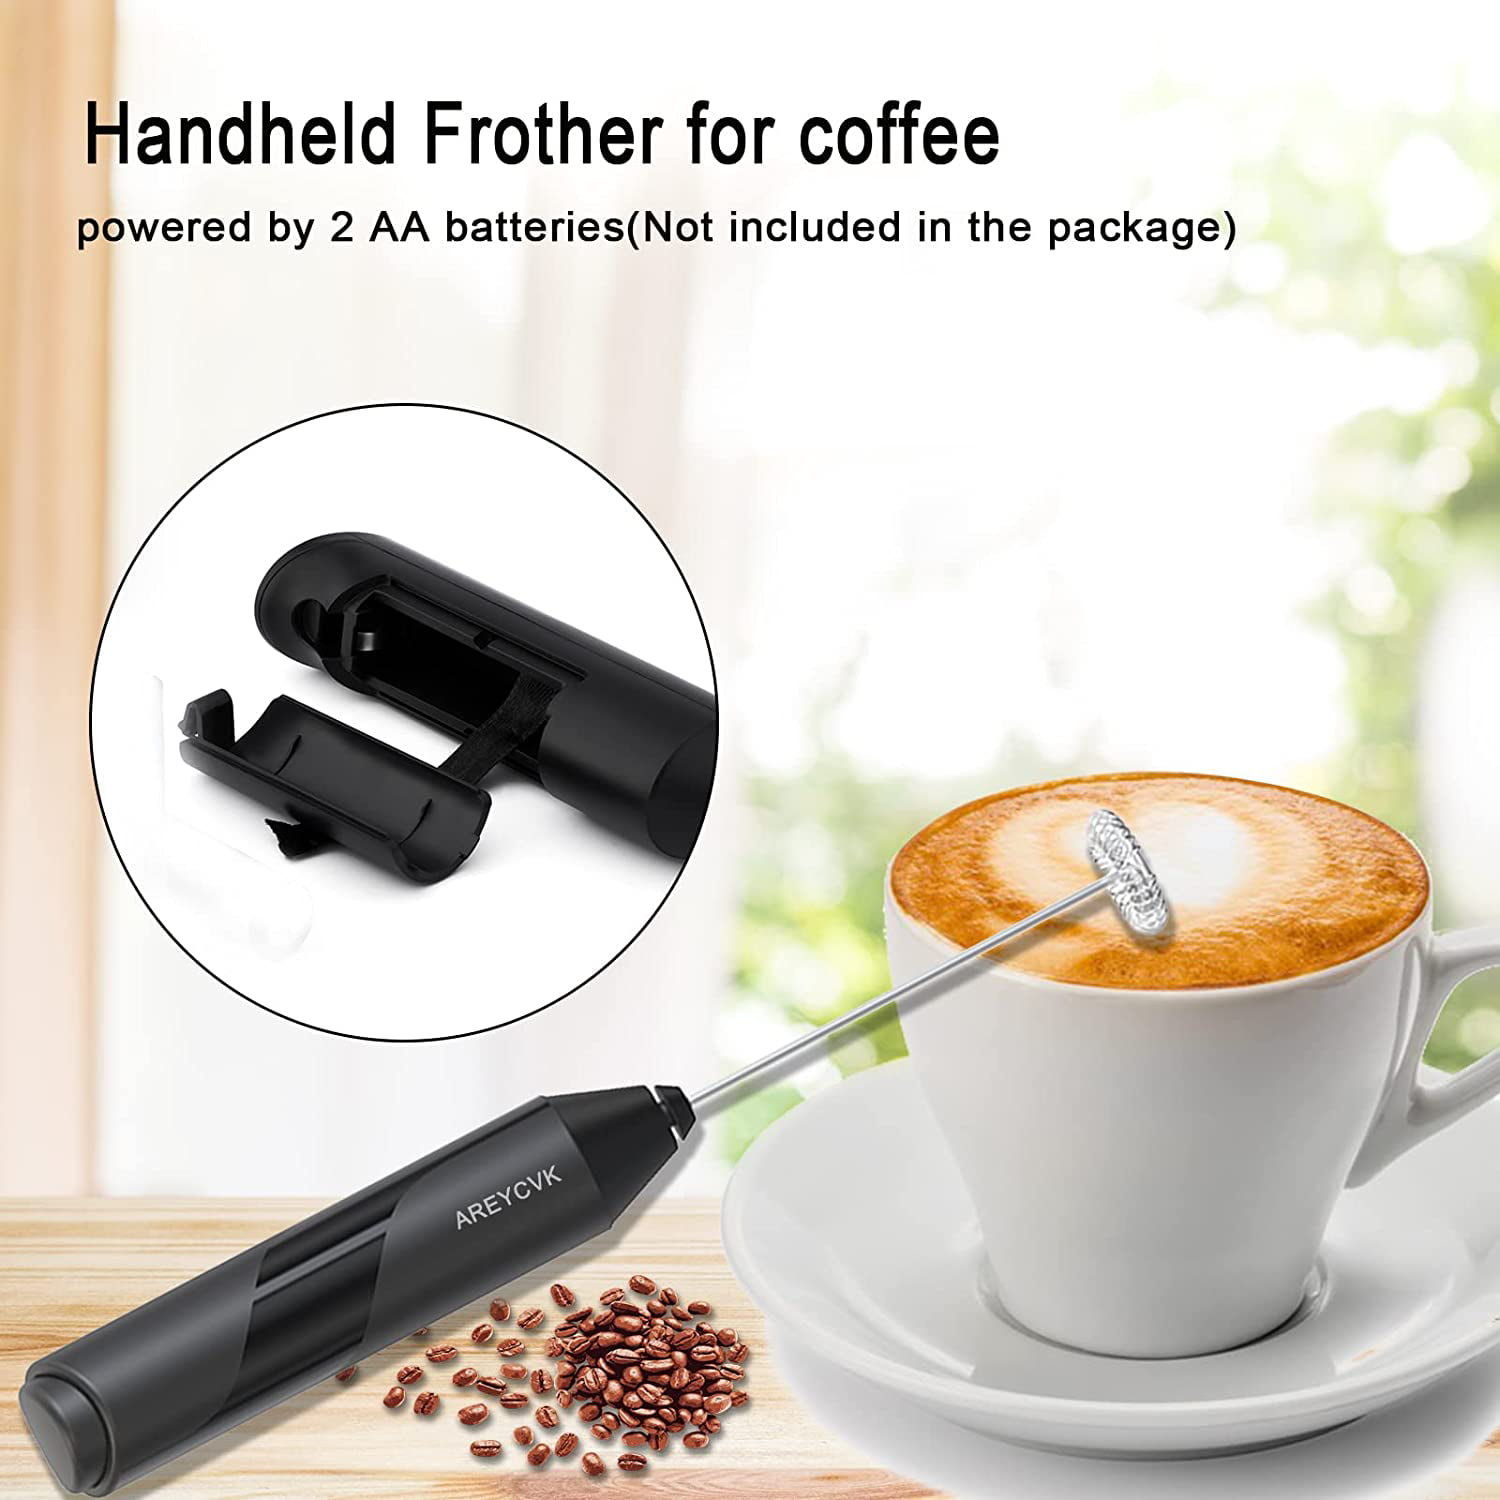 Milk Frother Complete Set Coffee Gift, Handheld Foam Maker for